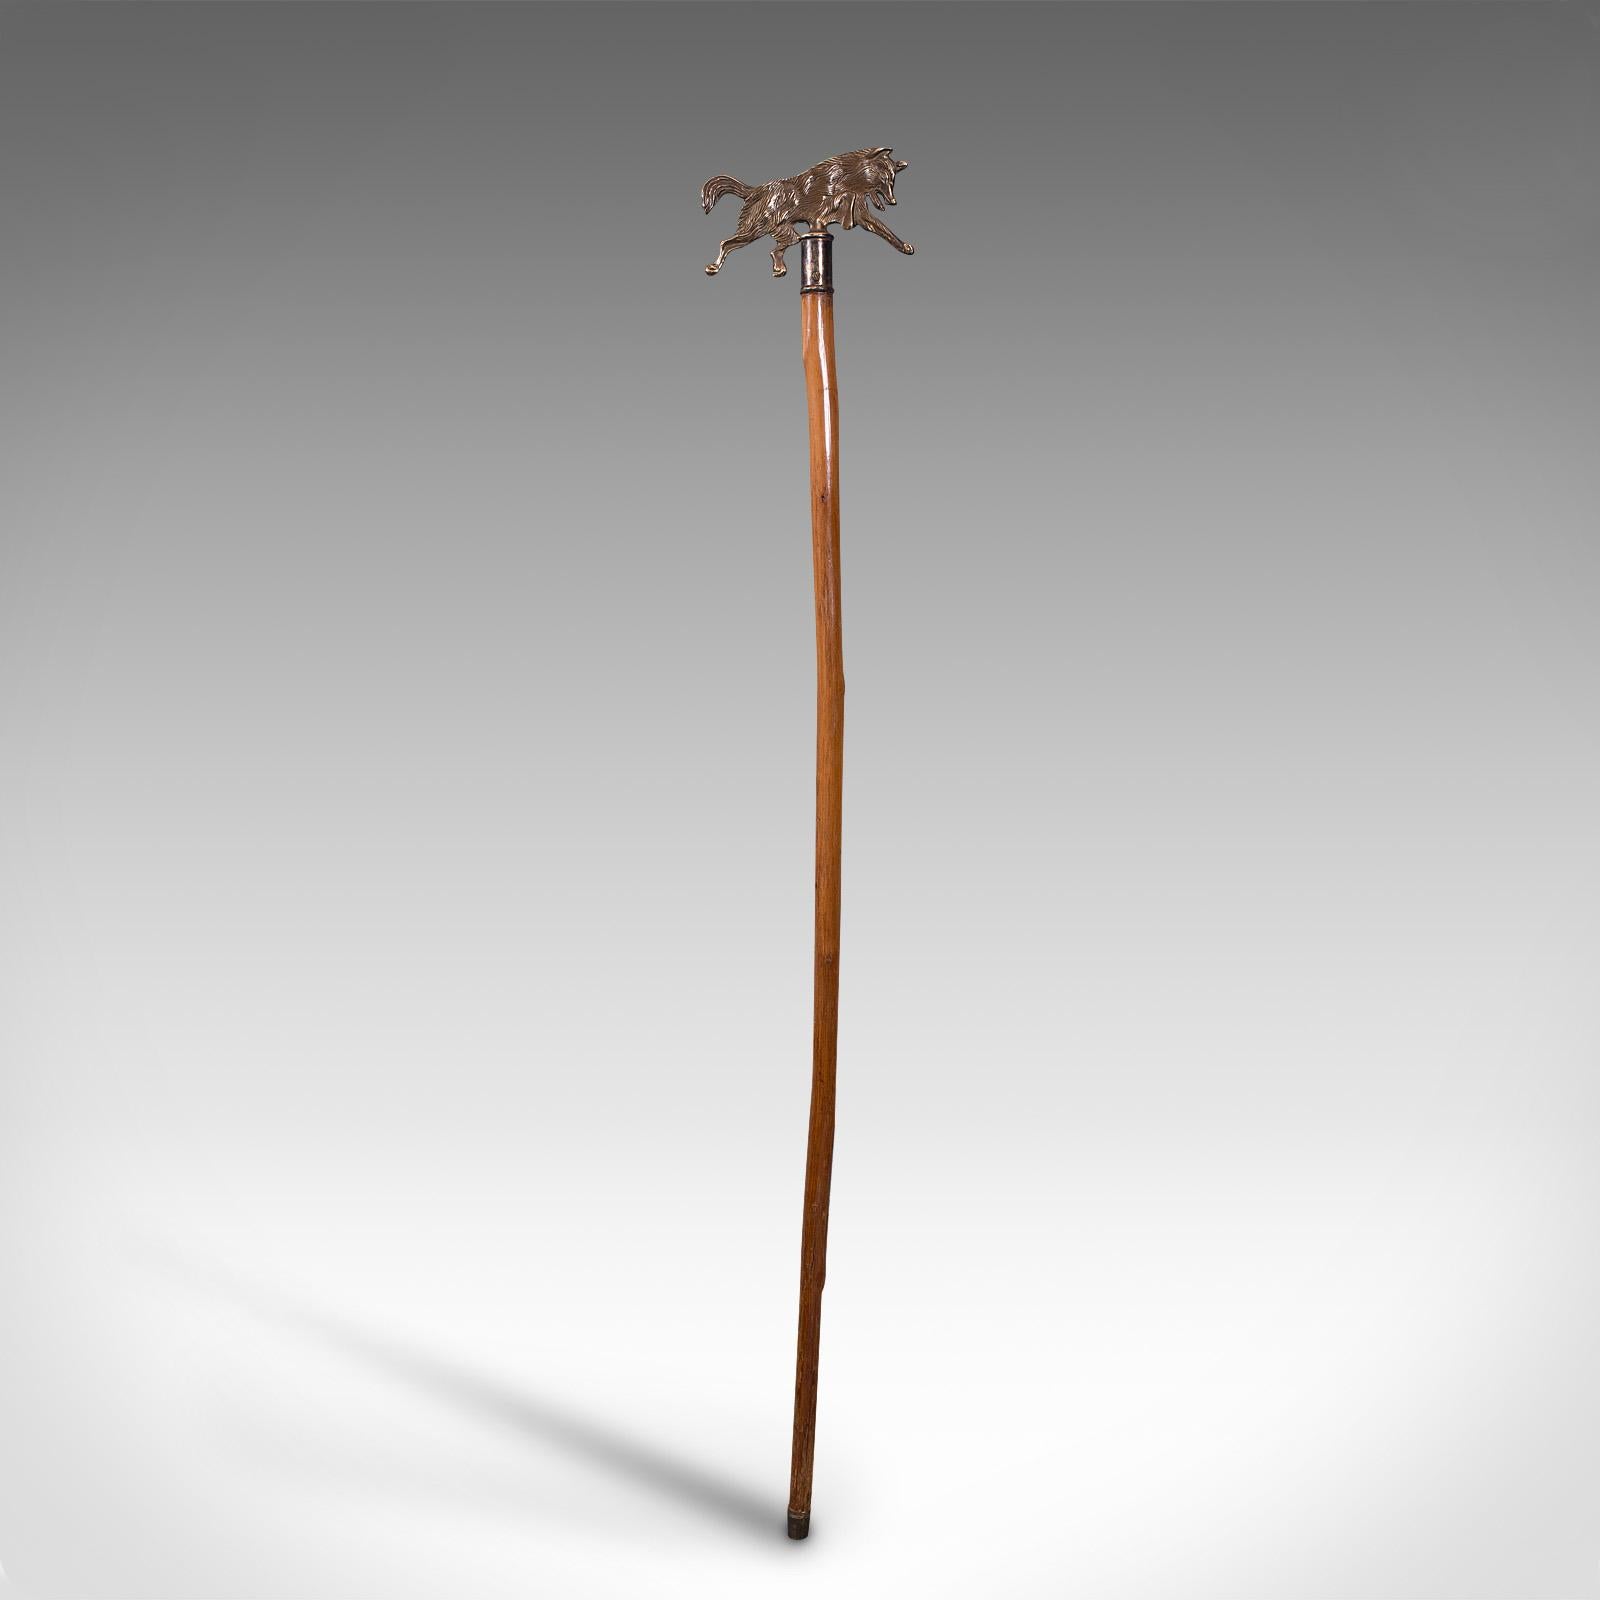 This is an antique gentleman's walking stick. A German, bentwood hazel and brass cane with Black Forest taste, dating to the Edwardian period, circa 1910.

Superb Black Forest craftsmanship with a tactile and visual appeal
Displays a desirable